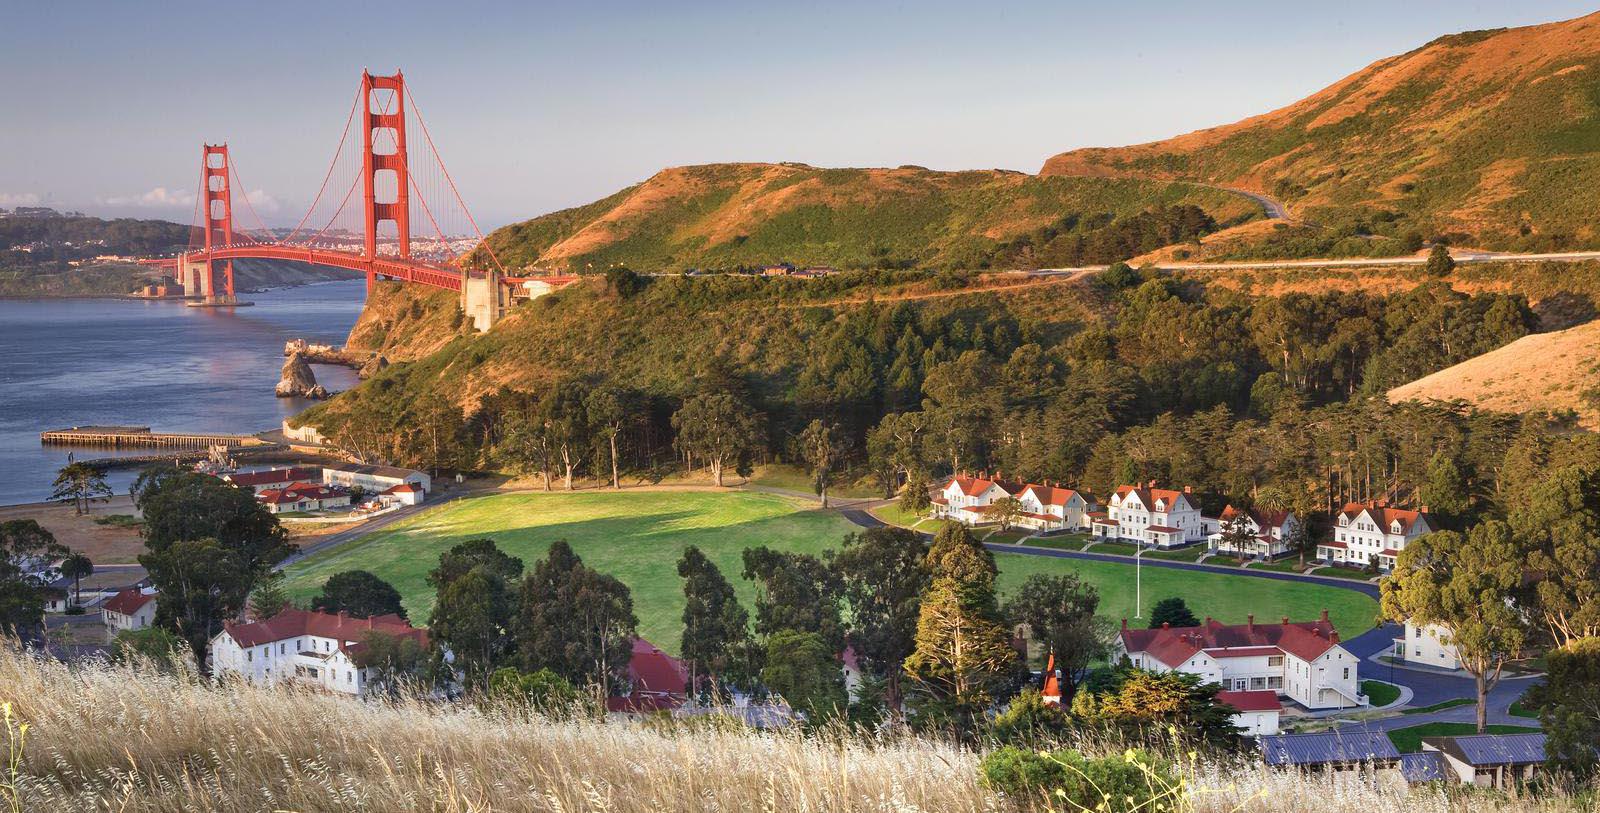 Discover the extensive military heritage of Cavallo Point.